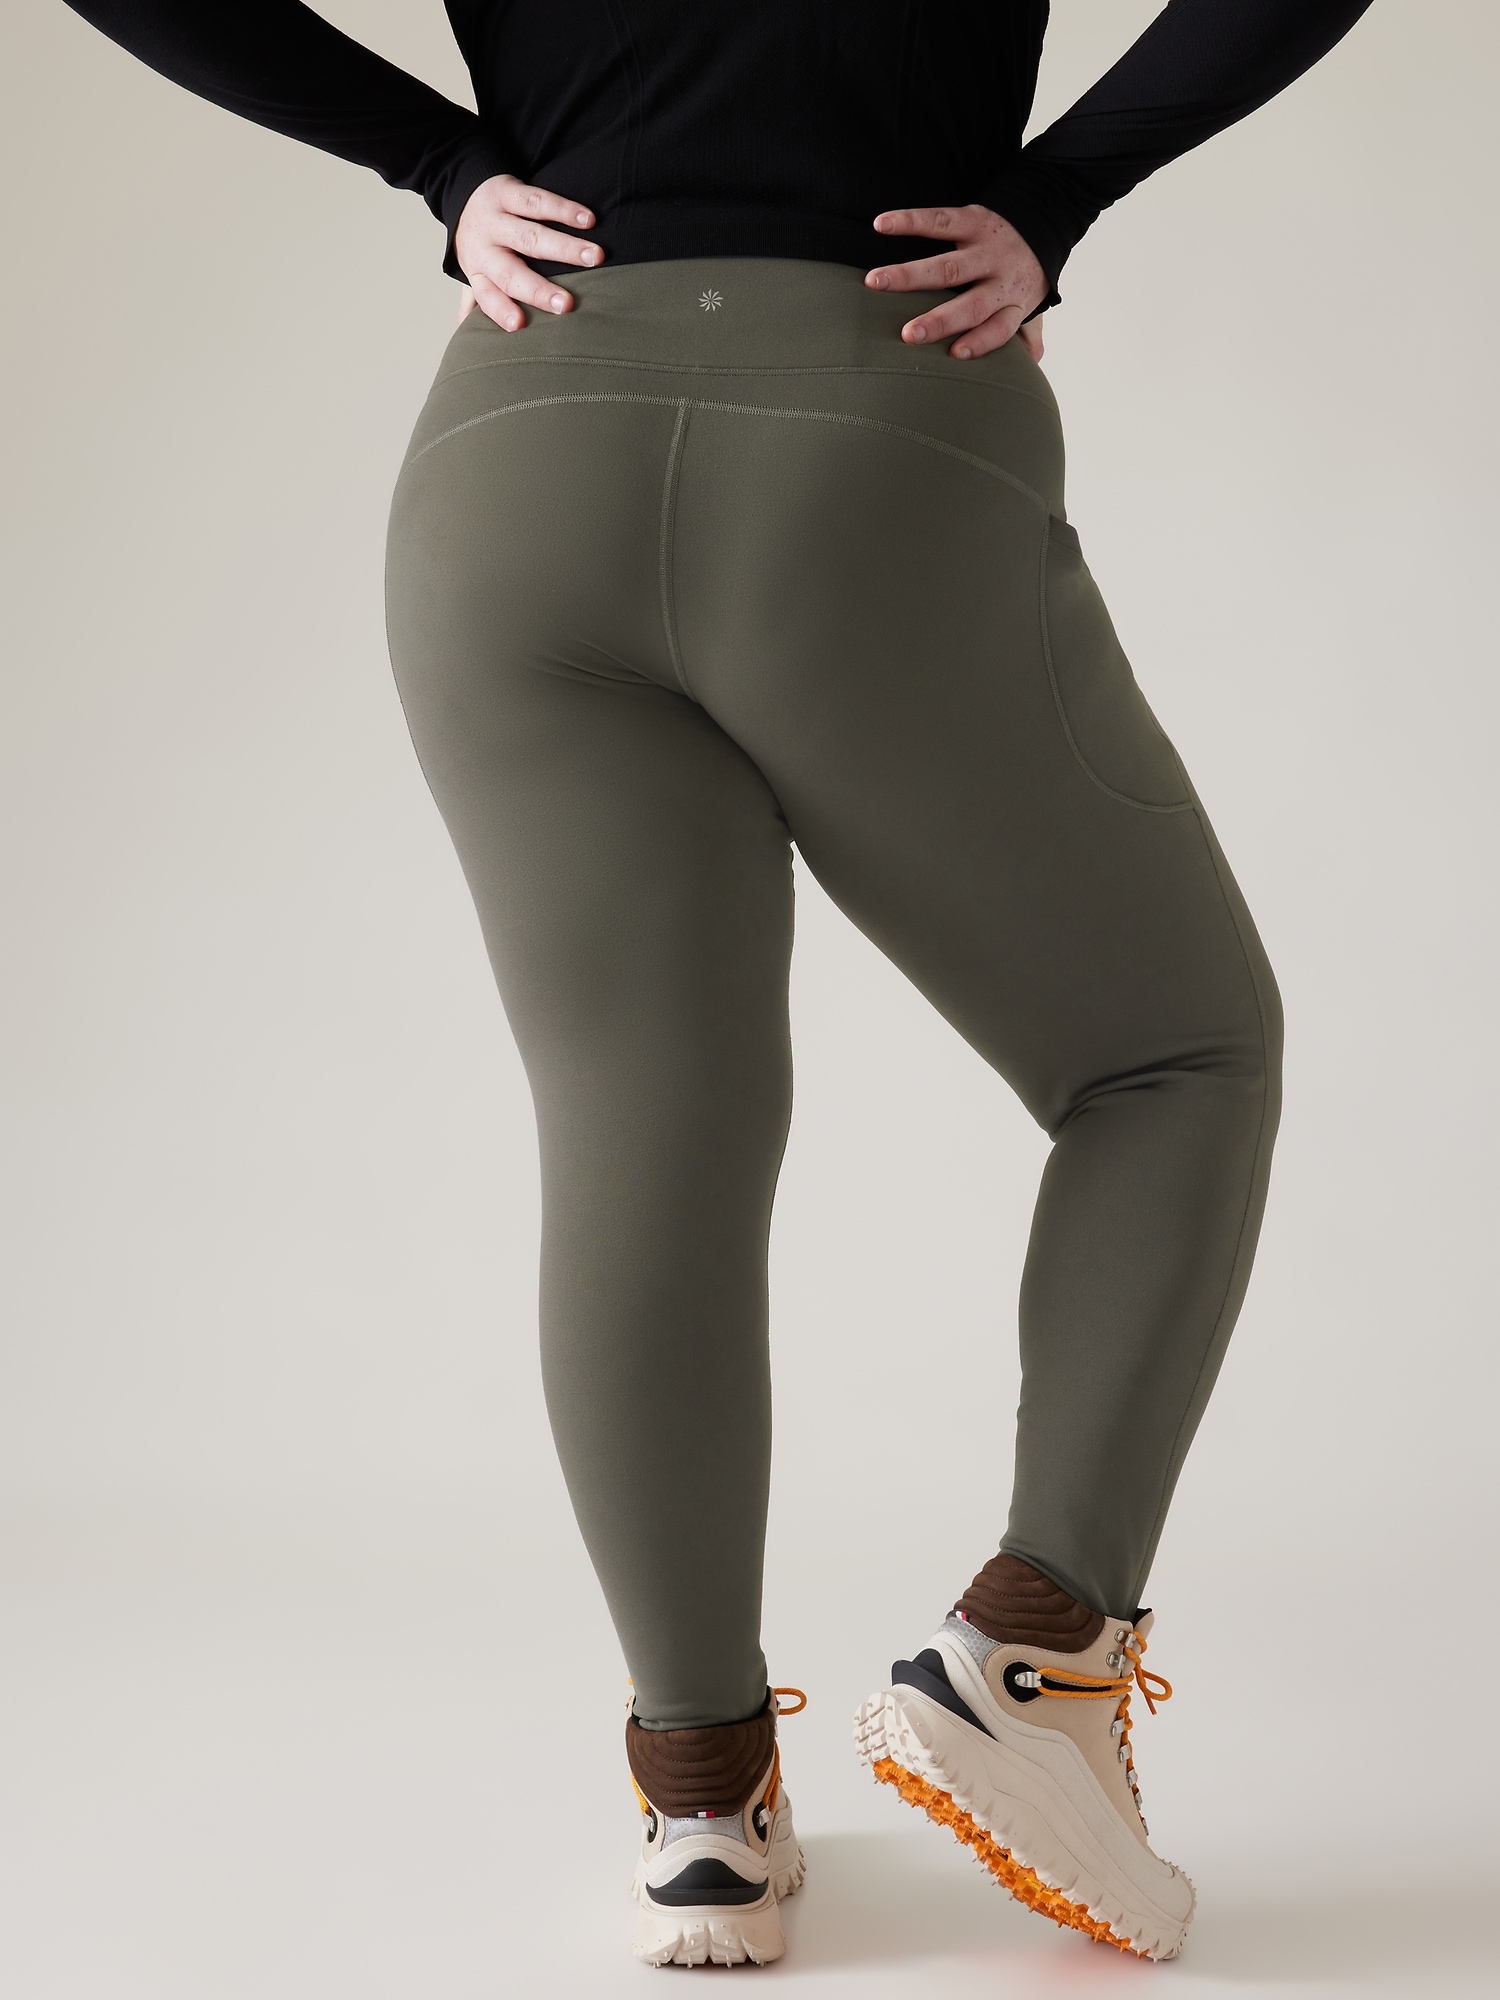 Has anyone tried these and have an opinion? : r/Athleta_gap